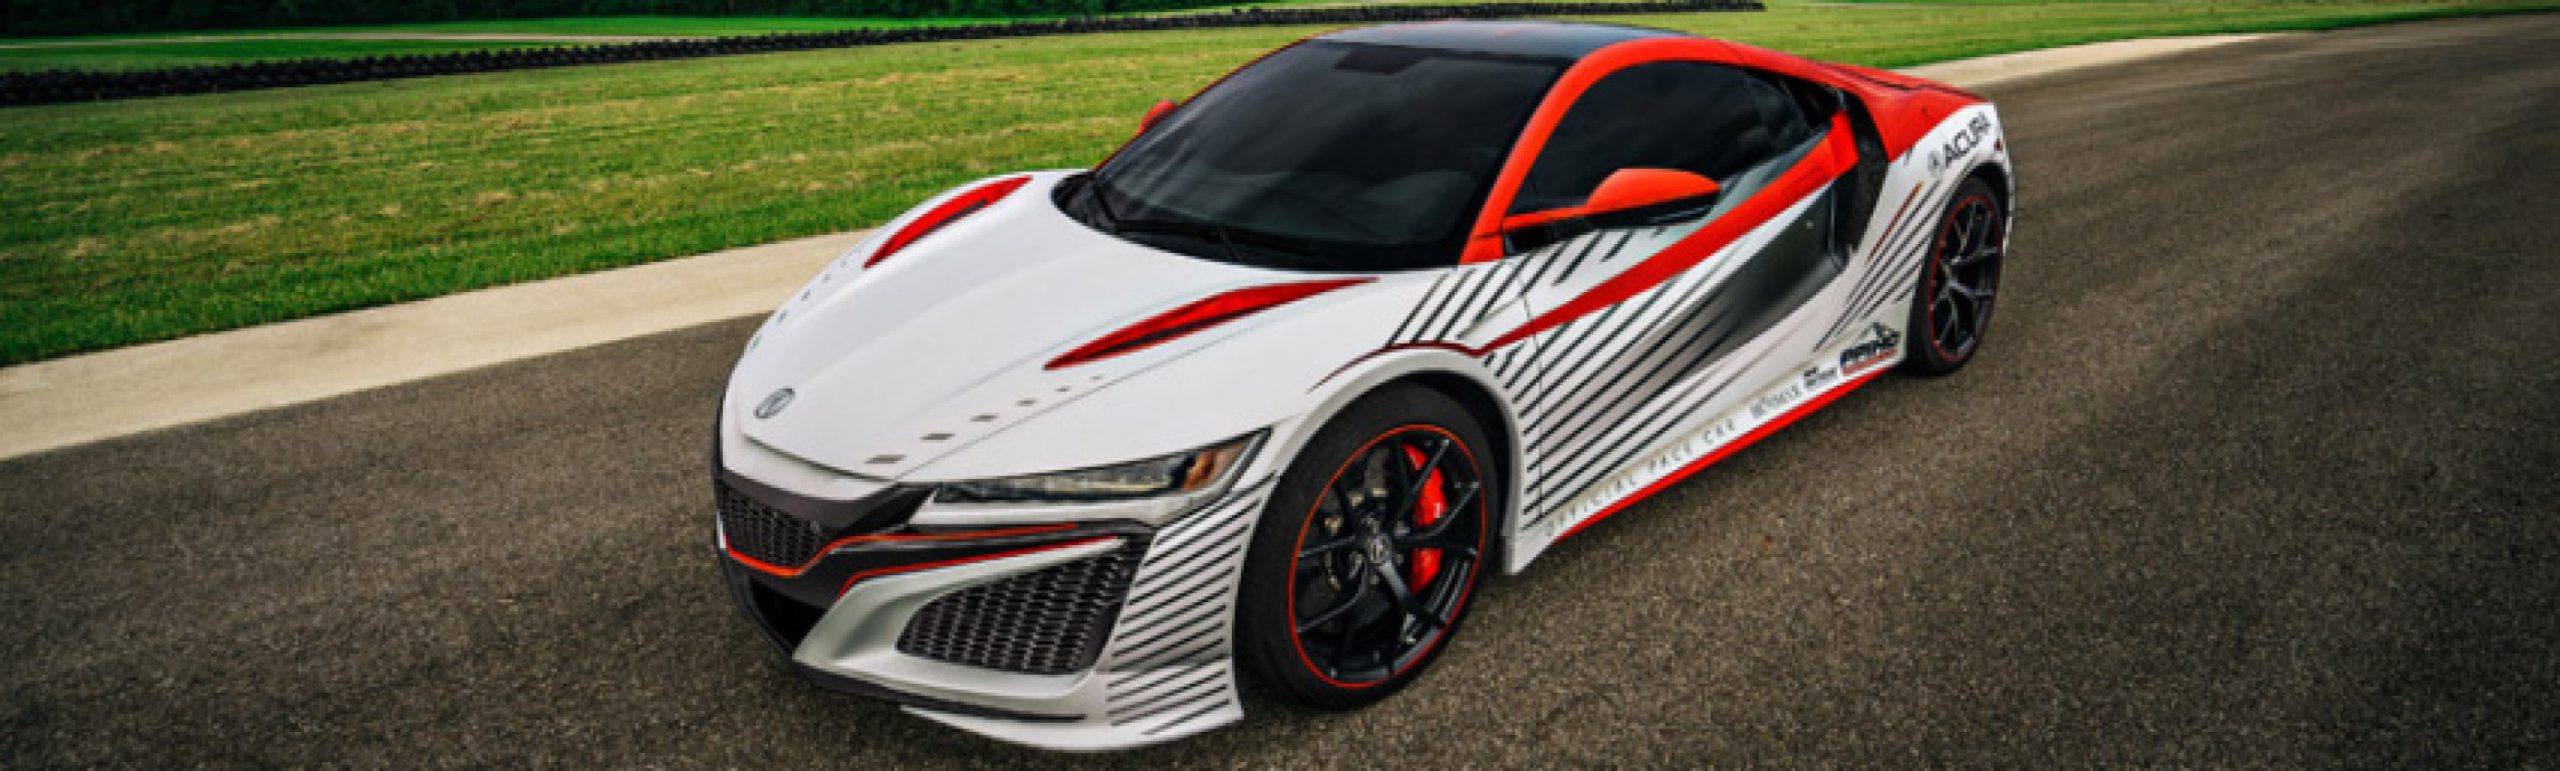 acura, autos, cars, acura nsx, acura nsx next-gen sports vehicle will be a pace car at pikes peak